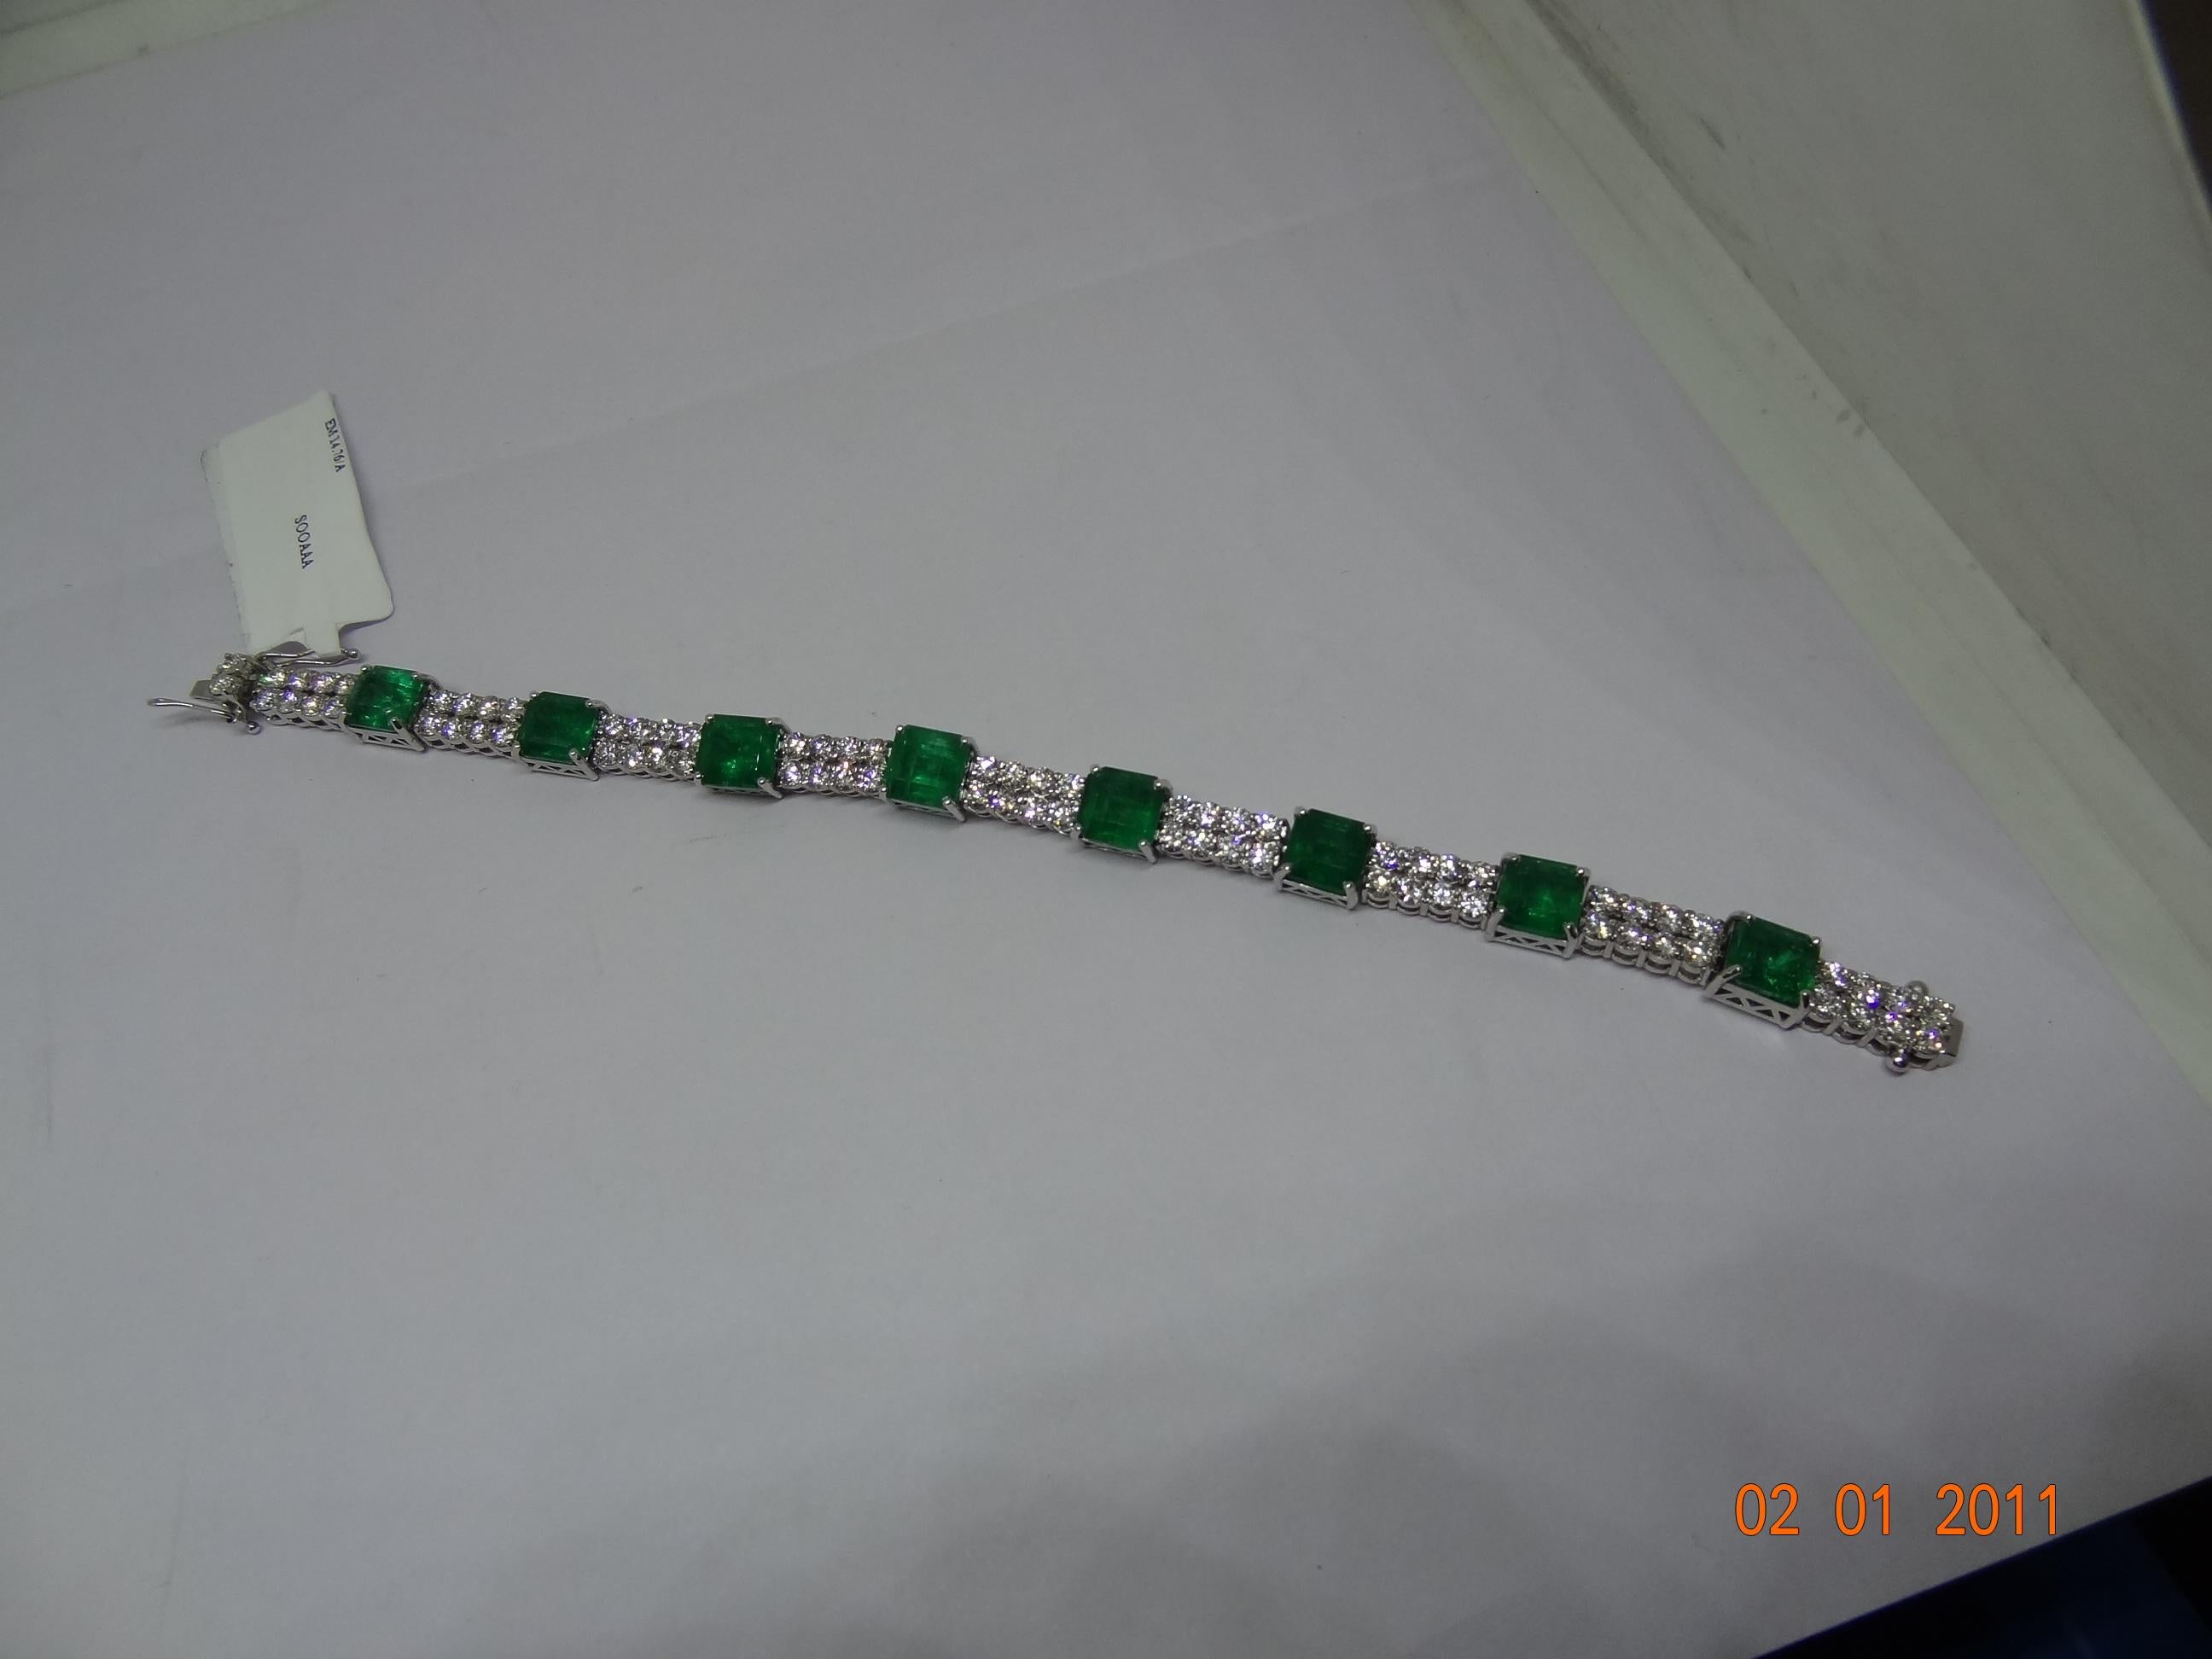 This is a natural Zambian Emerald bracelet with diamonds and 14k gold. The emeralds are very high quality and very good quality diamonds the clarity is vsi and G colour


Emeralds : 14.76 carats
diamonds : 4.74 carats
gold : 14.95 gm

This is a